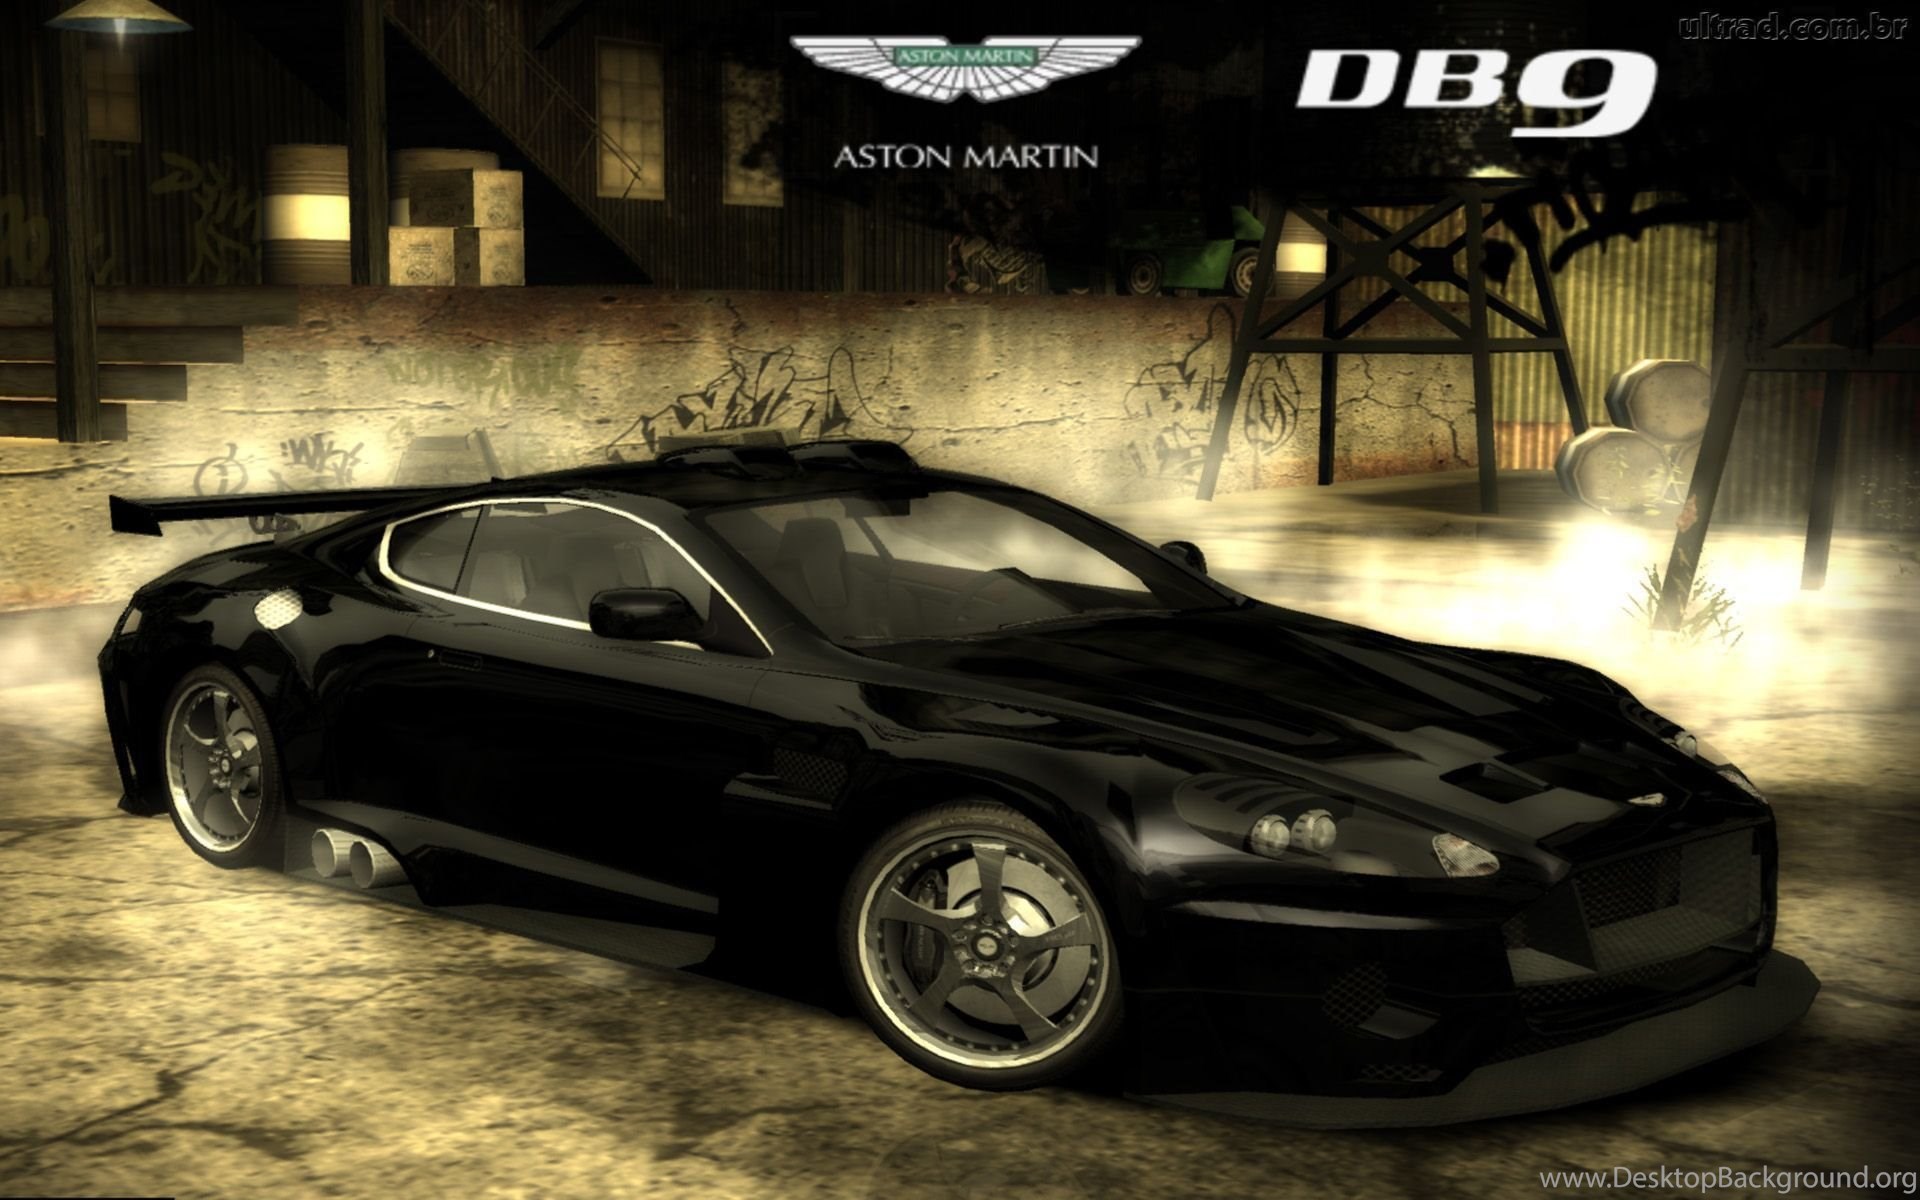 Машины в игре most wanted. Aston Martin db9 2005. Aston Martin из NFS most wanted. Aston Martin db9 most wanted. Машина Исси NFS most wanted.